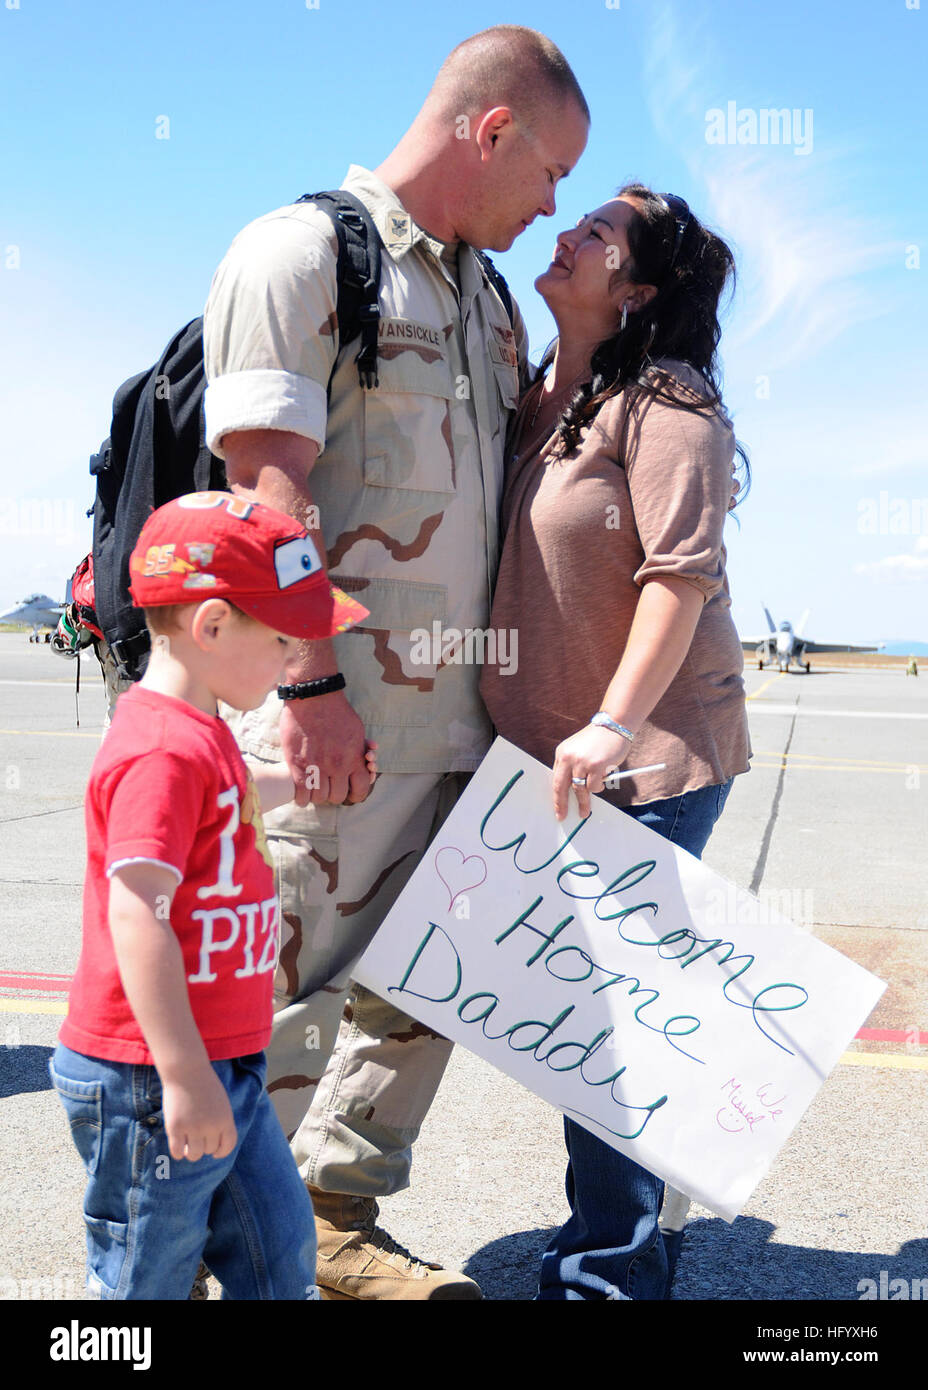 110709-N-ZK021-004 OAK HARBOR, Wash. (July 9, 2011) Aviation Structural Mechanic 1st Class Ry Vansickle, from Wichita, Kan., assigned to the Scorpions of Electronic Attack Squadron (VAQ) 132, is greeted by family during a homecoming ceremony at Naval Air Station Whidbey Island following an eight-month expeditionary deployment supporting Operation New Dawn and Operations Odyssey Dawn and Unified Protector. VAQ-132 protected numerous U.S. and Coalition military assets and personnel in the U.S. Central Command and U.S. European Command areas of responsibility. (U.S. Navy photo by Mass Communicati Stock Photo